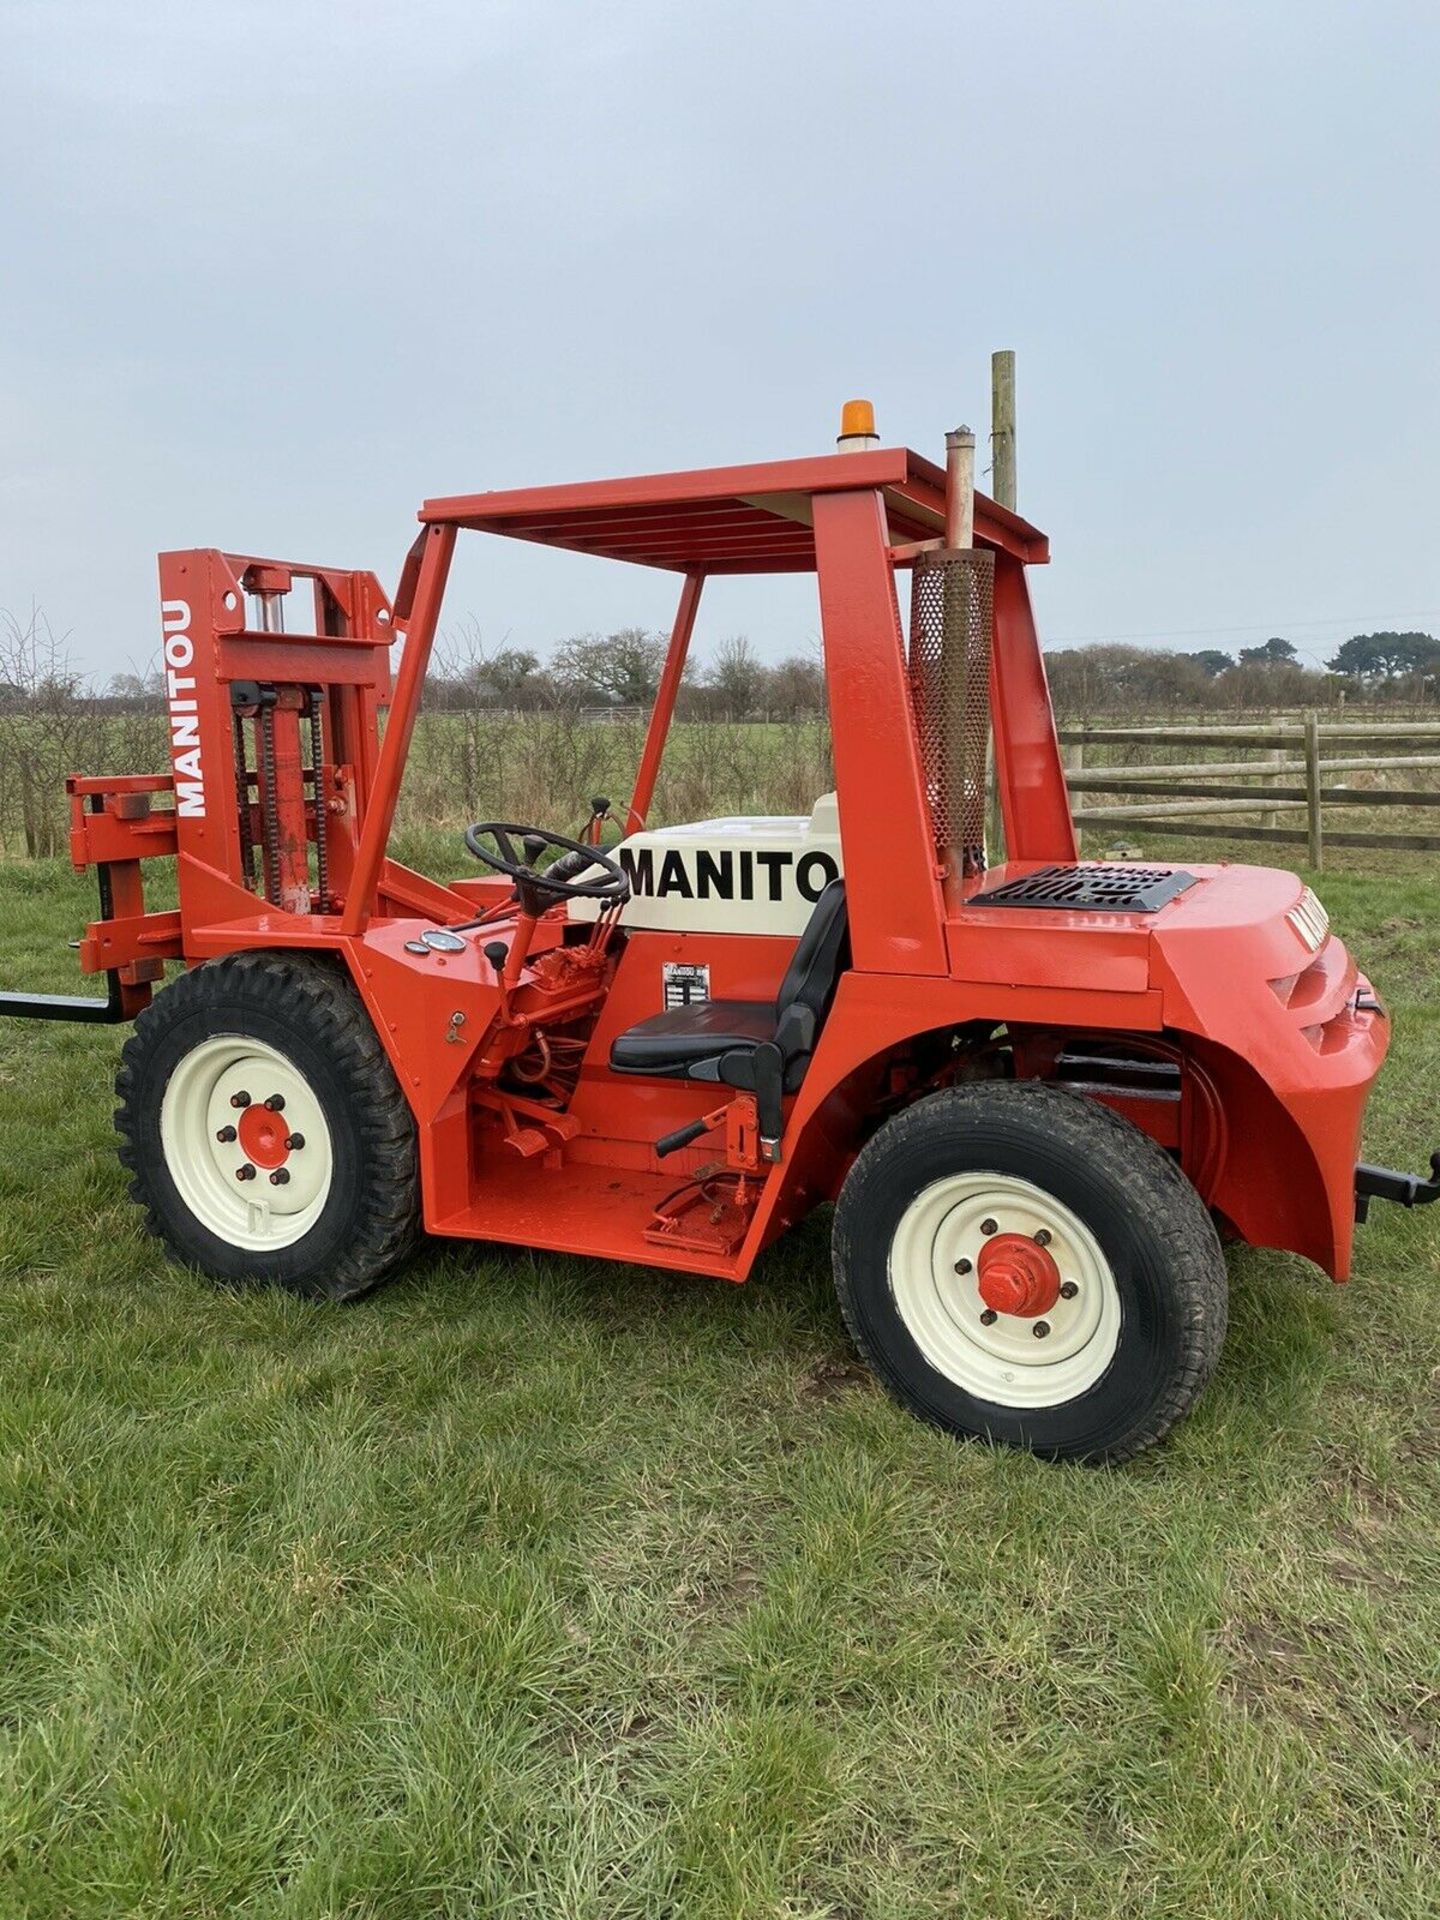 Manitou Buggy rough terrain diesel forklift - Image 2 of 8